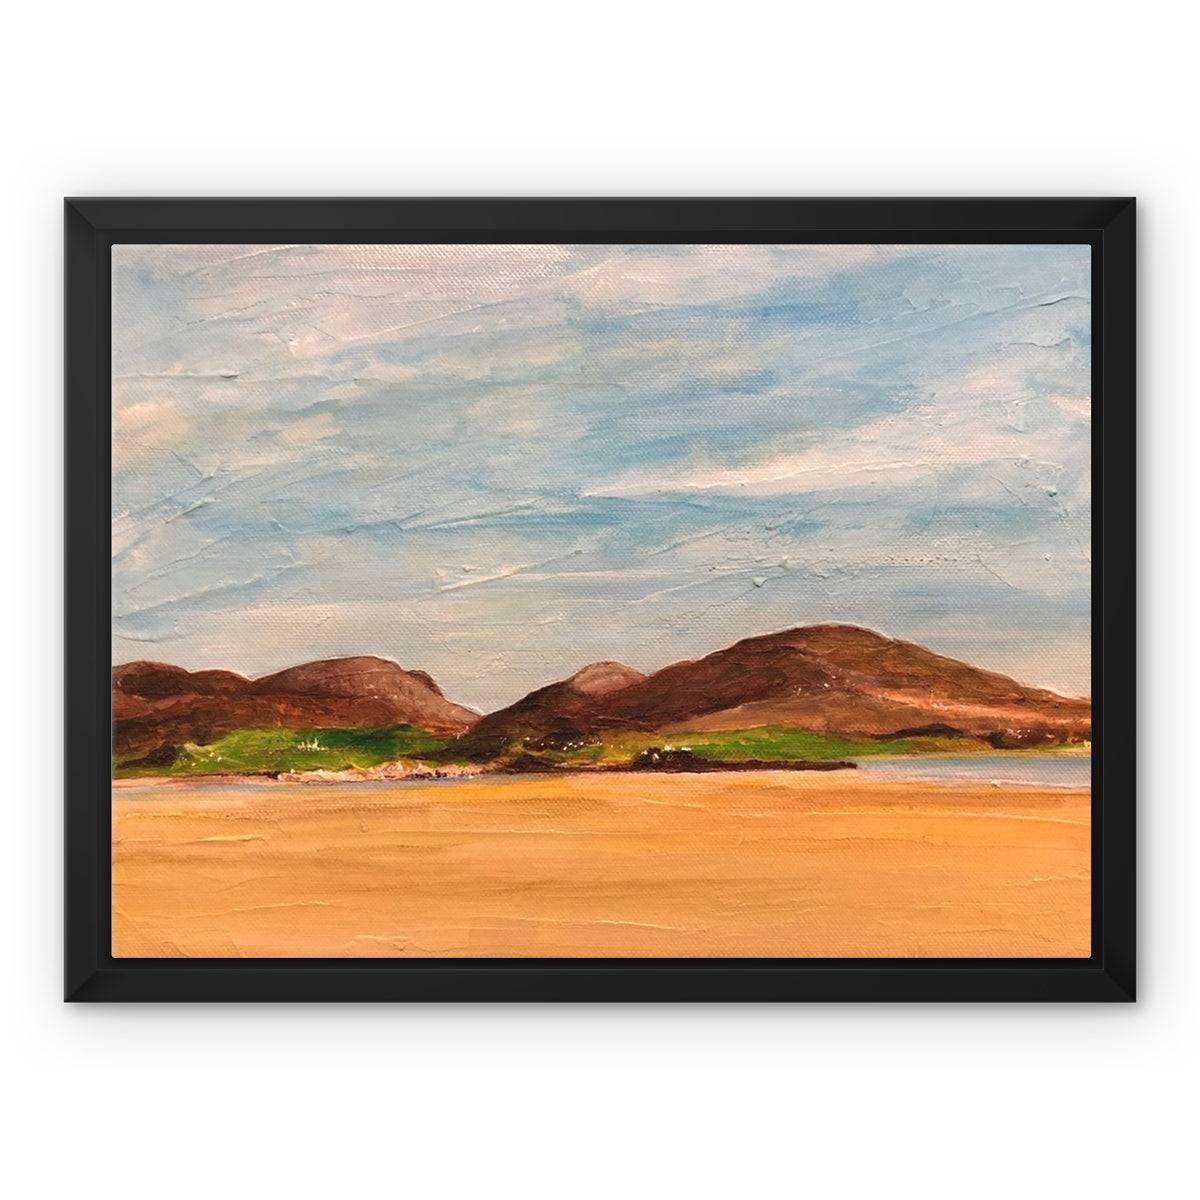 Uig Sands Lewis Painting | Framed Canvas From Scotland-Floating Framed Canvas Prints-Hebridean Islands Art Gallery-12"x8"-Black Frame-Paintings, Prints, Homeware, Art Gifts From Scotland By Scottish Artist Kevin Hunter